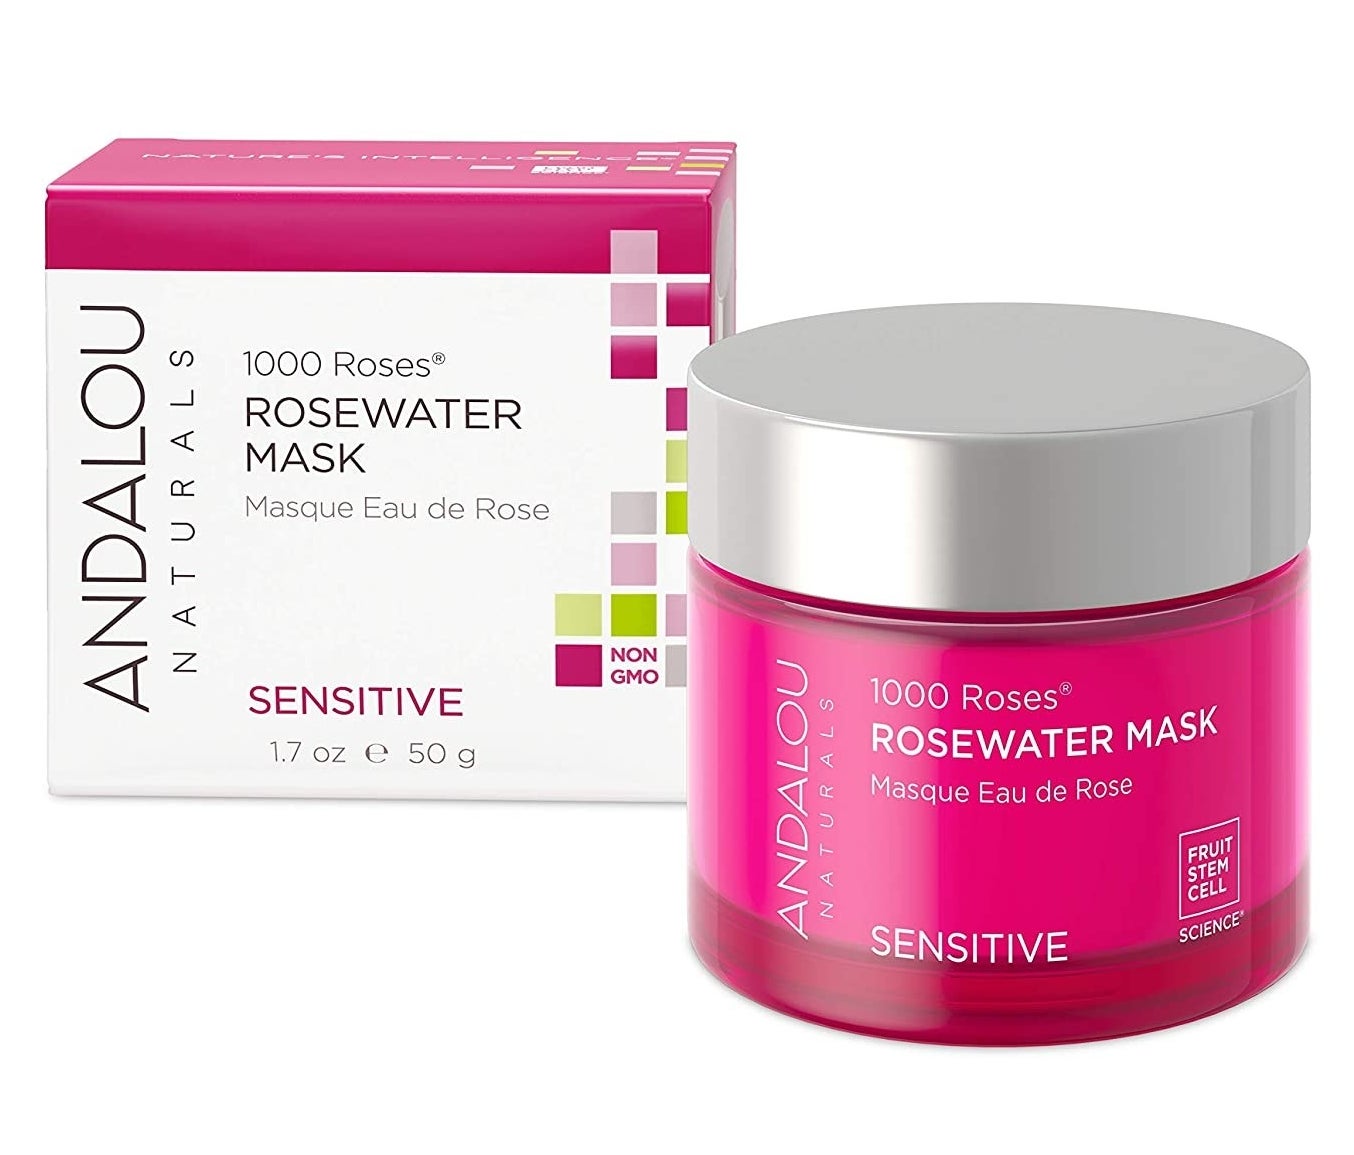 The rosewater mask